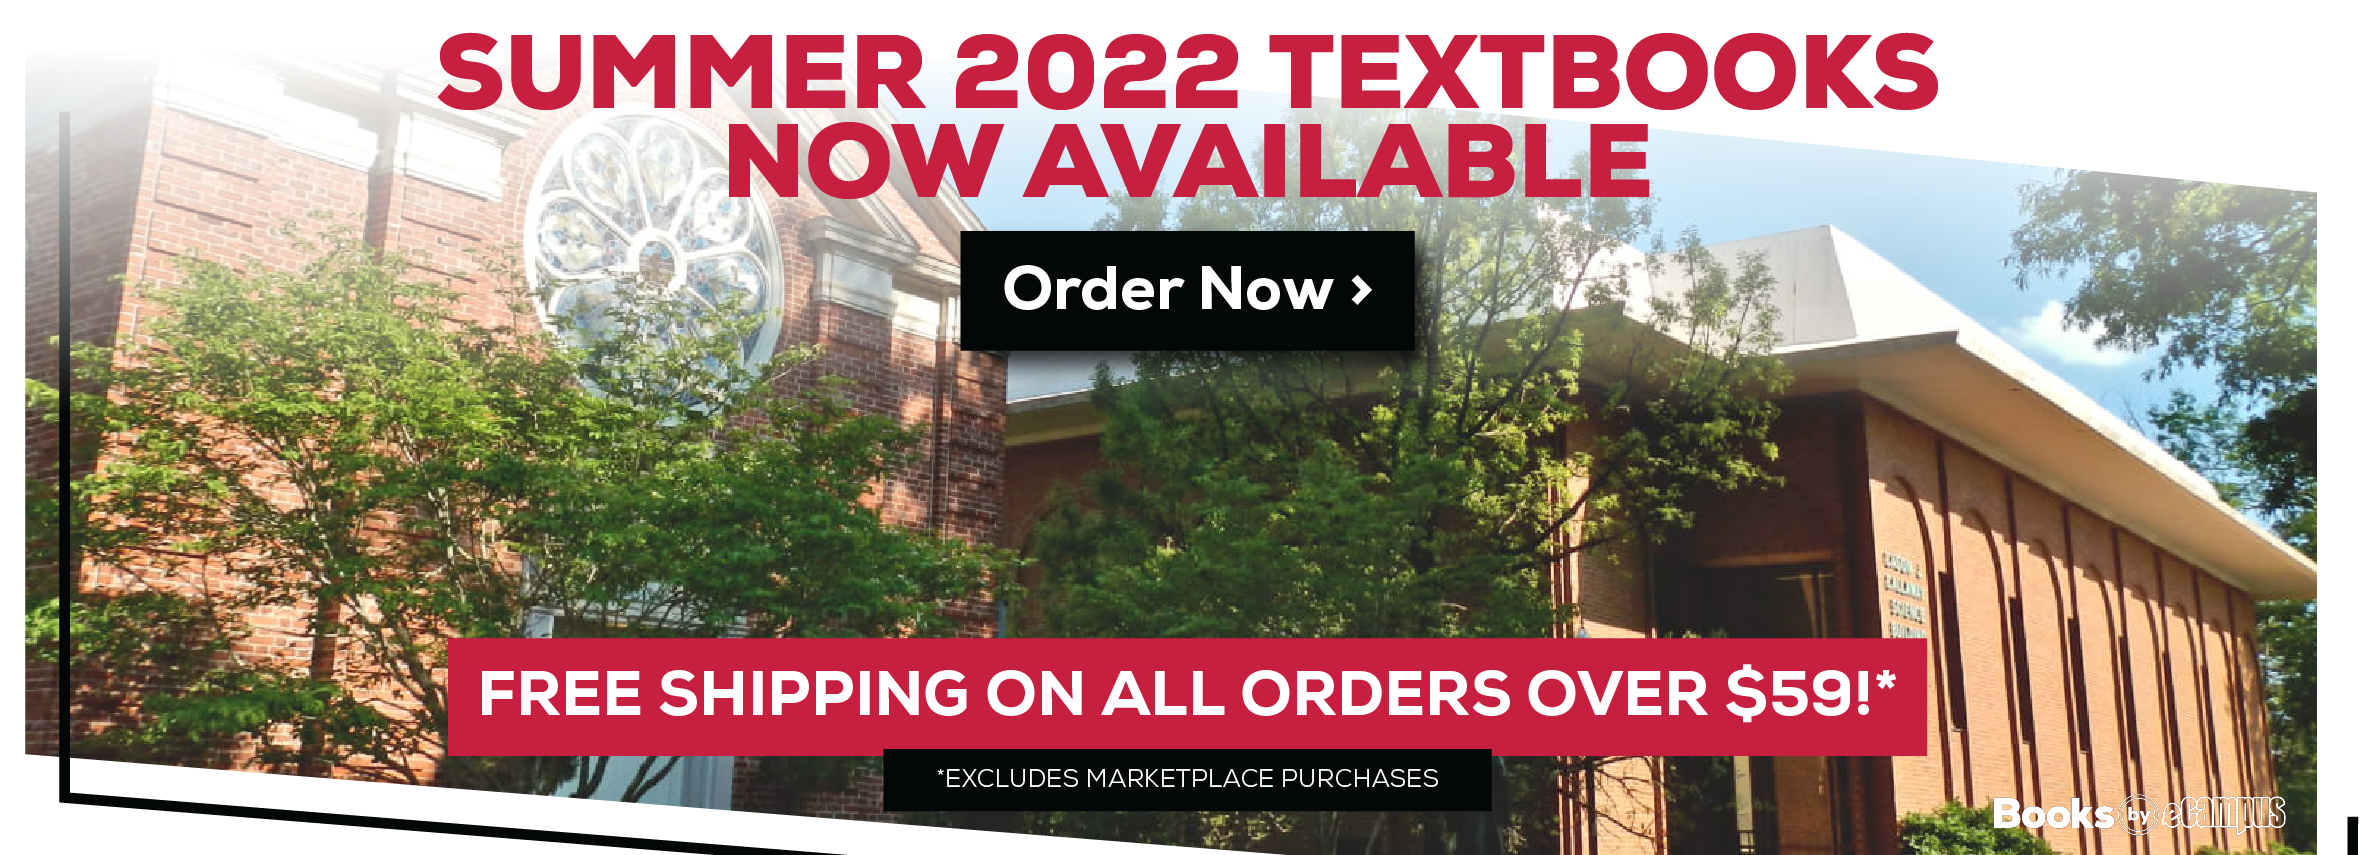 Summer 2022 Textbooks Now Available. Order Now. Free shipping on all orders over $59!